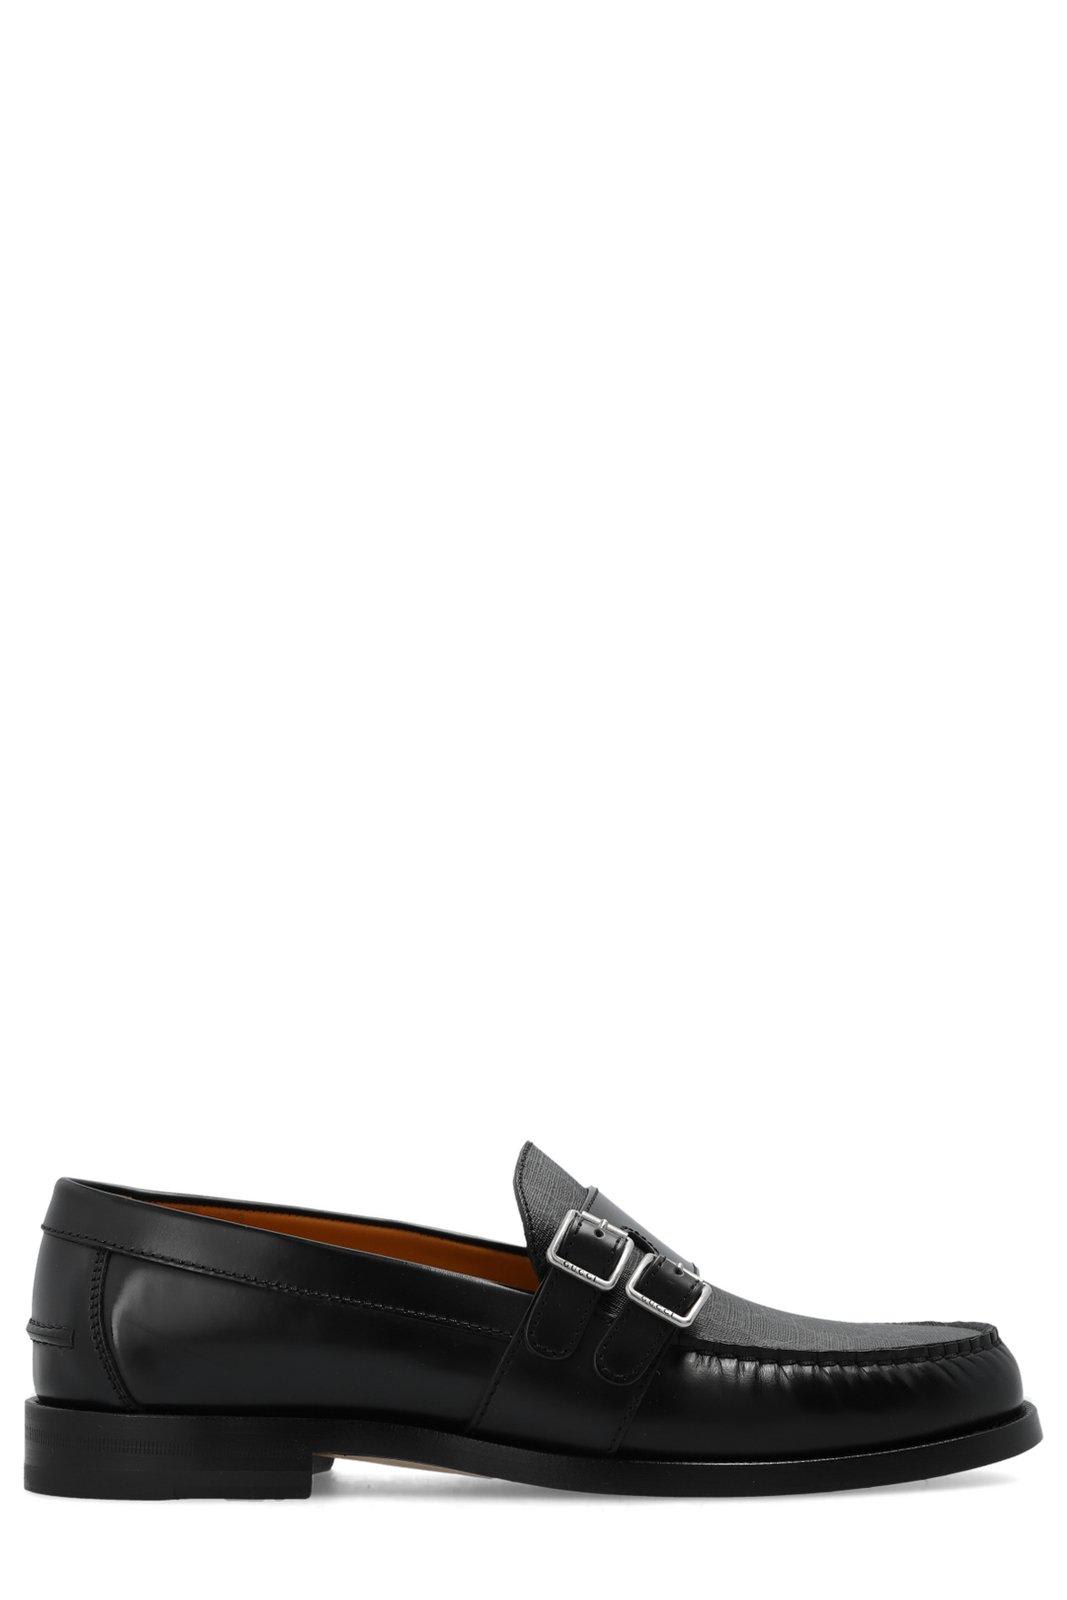 Shop Gucci Buckle Detailed Loafers In Black